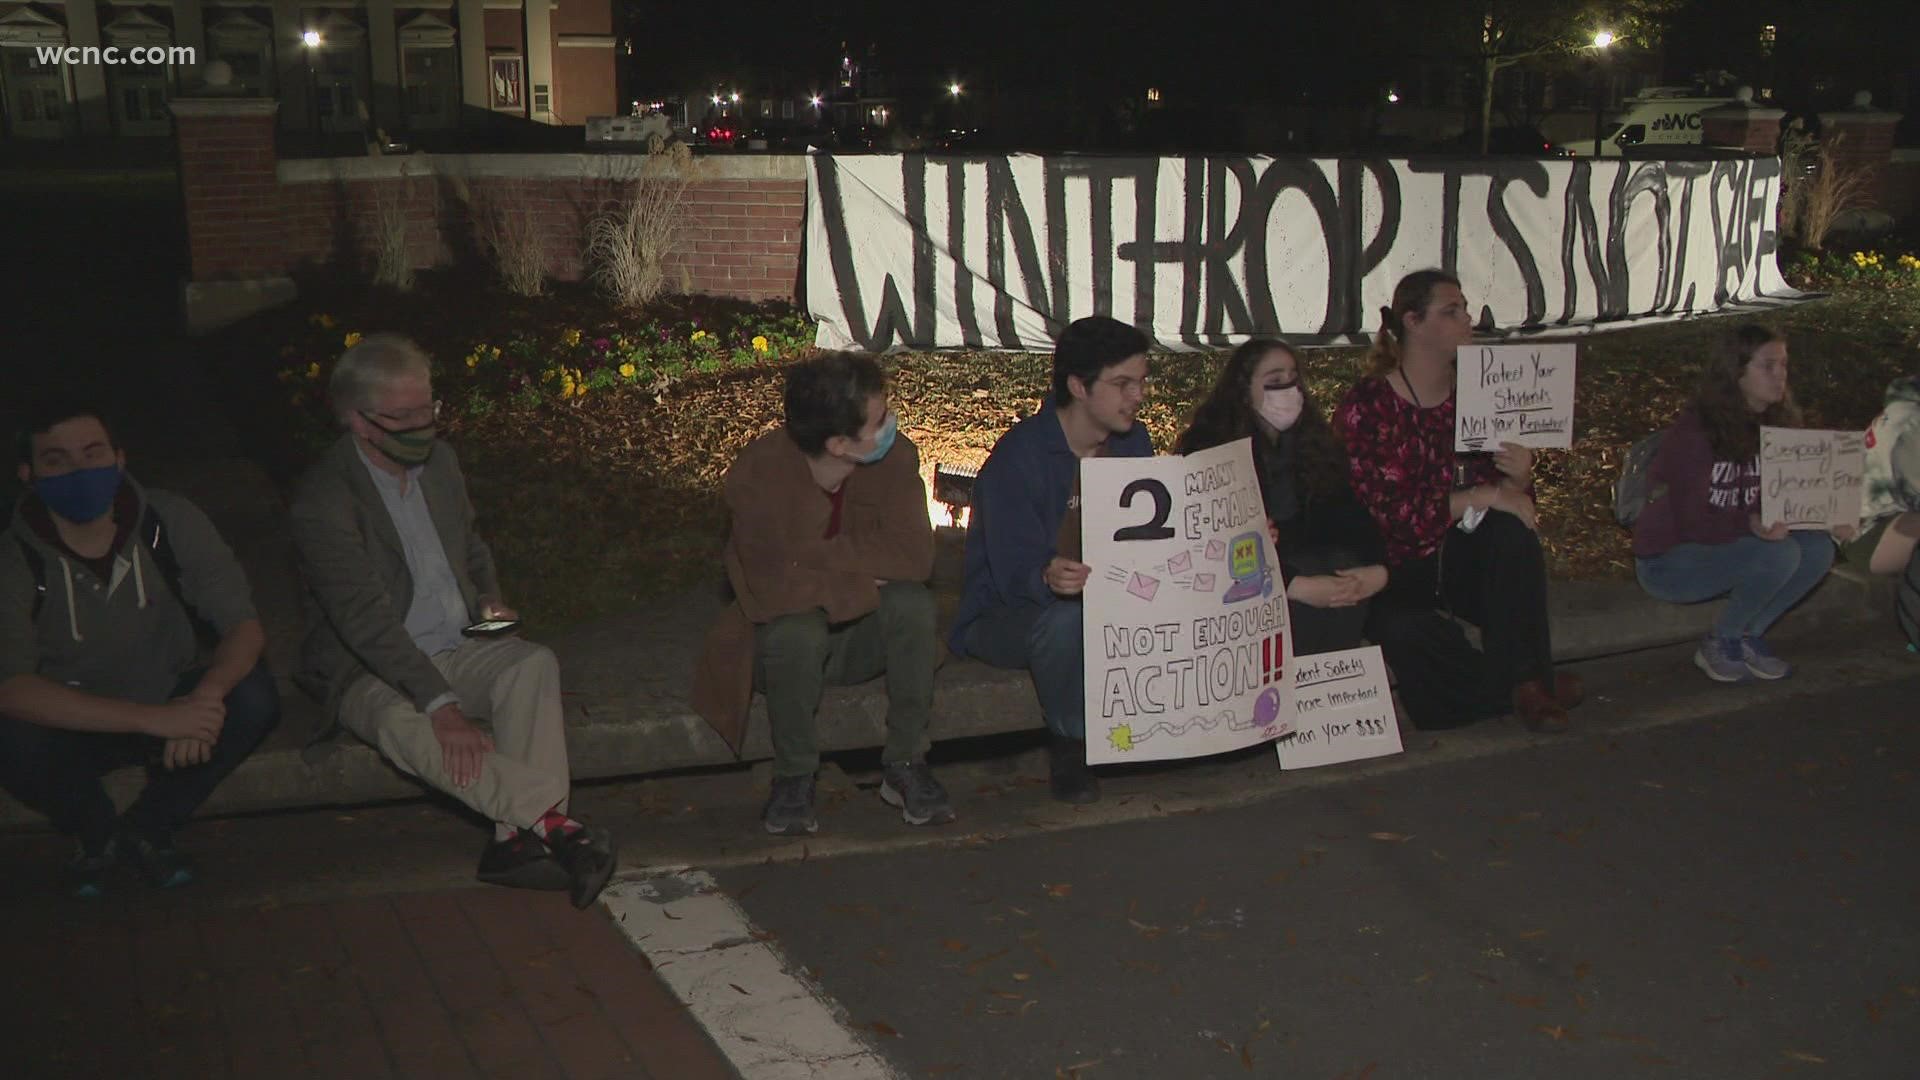 The protest comes after a student was sexually assaulted in a dorm in November. Police say the suspect wasn't a student.